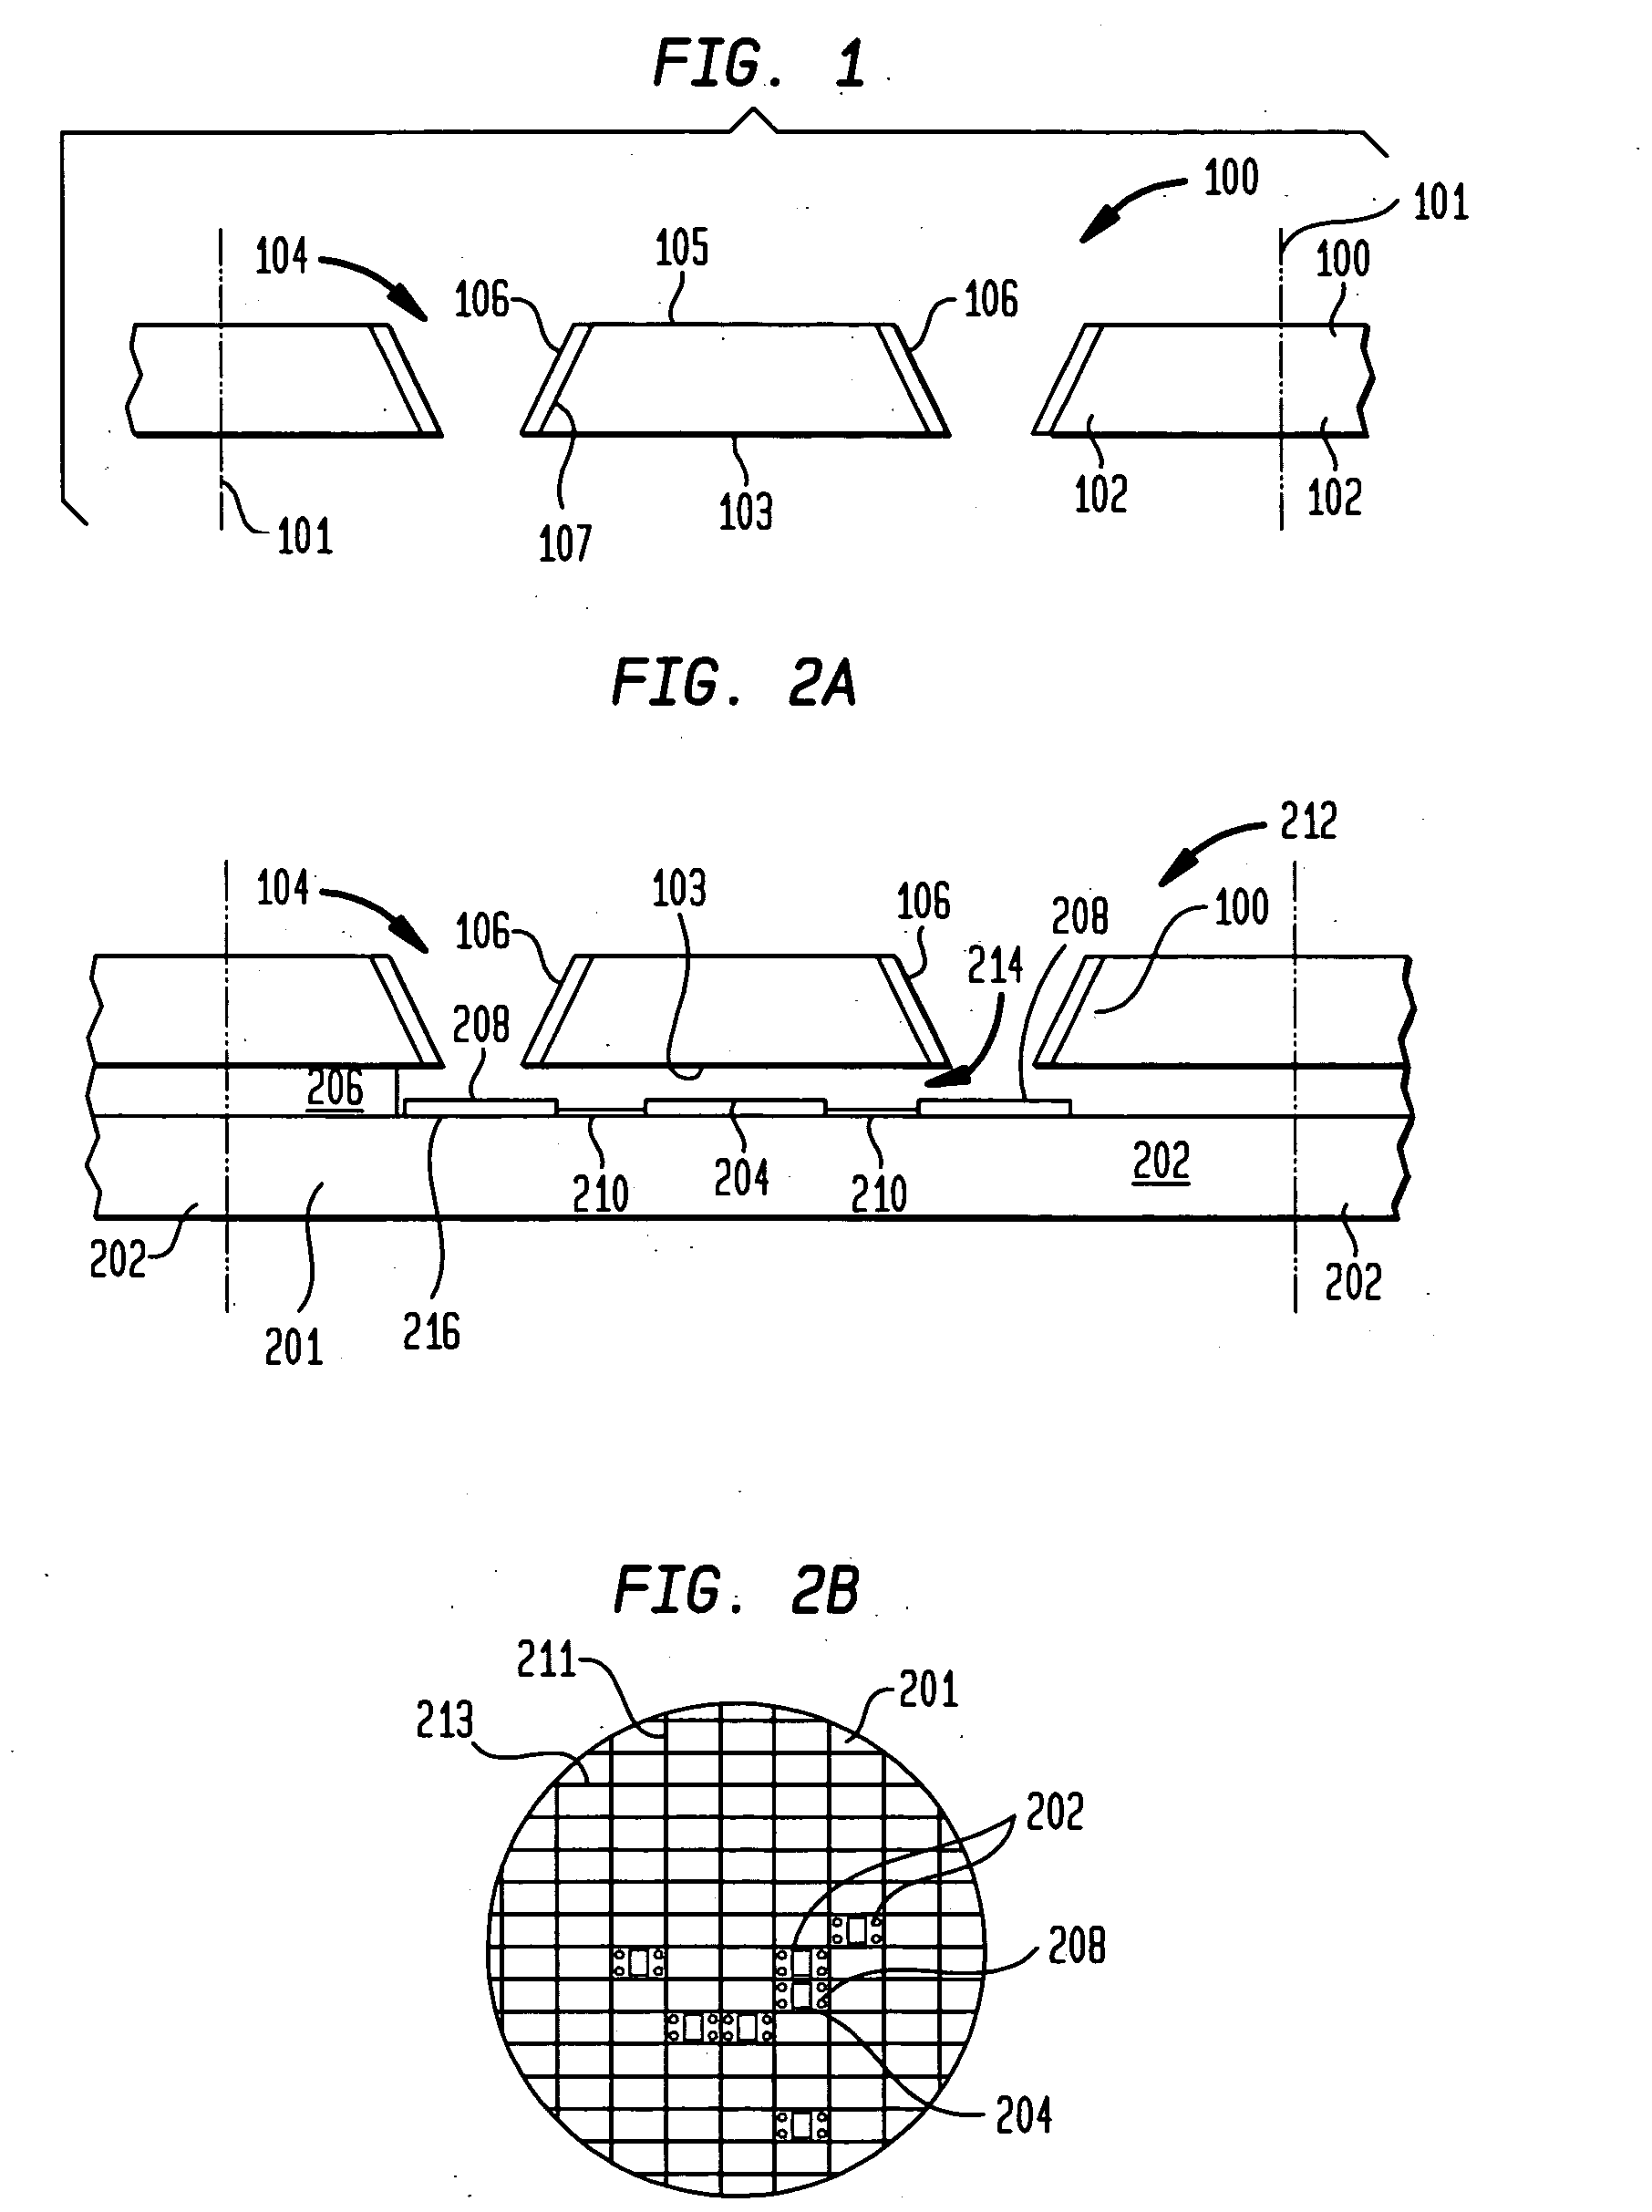 Structure and self-locating method of making capped chips